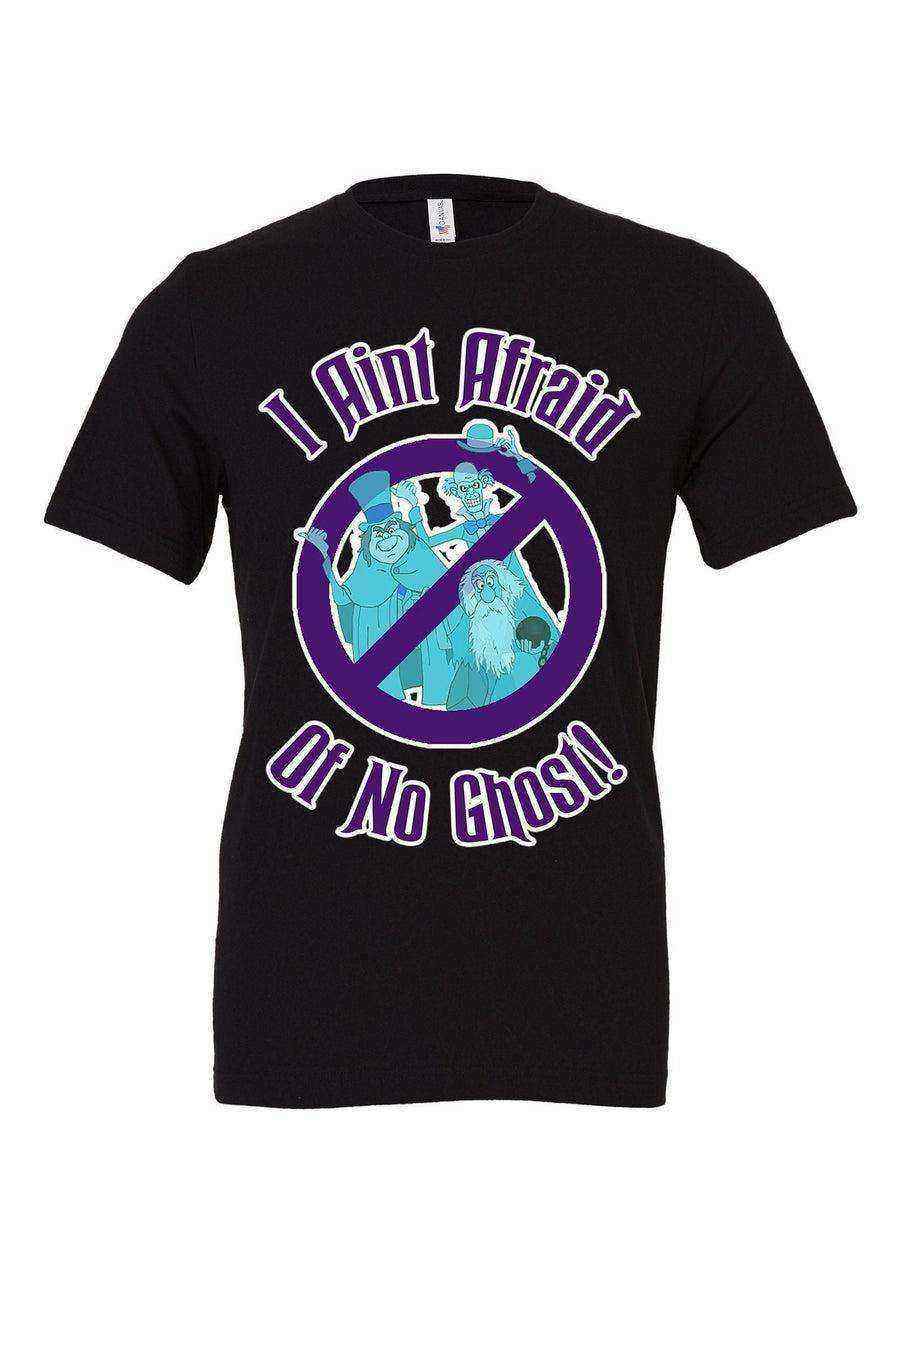 Womens | Haunted Mansion Ghostbusters Tee - Dylan's Tees